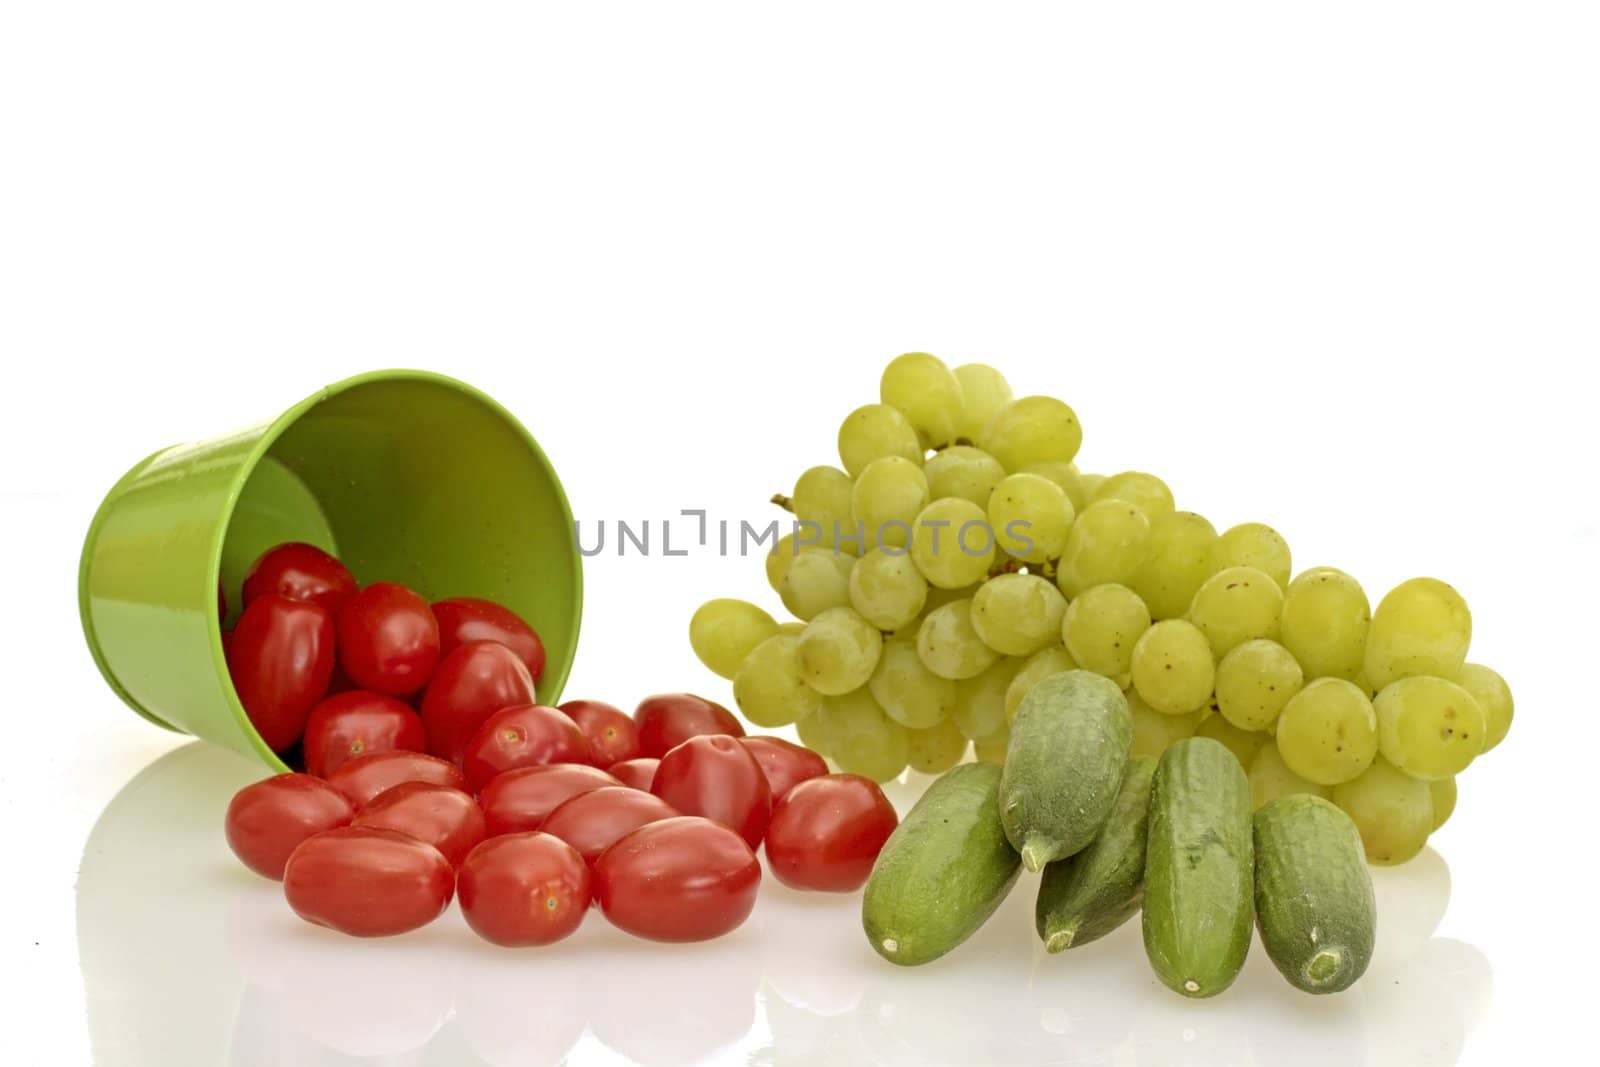 Tomatoe, cucumber and grapes